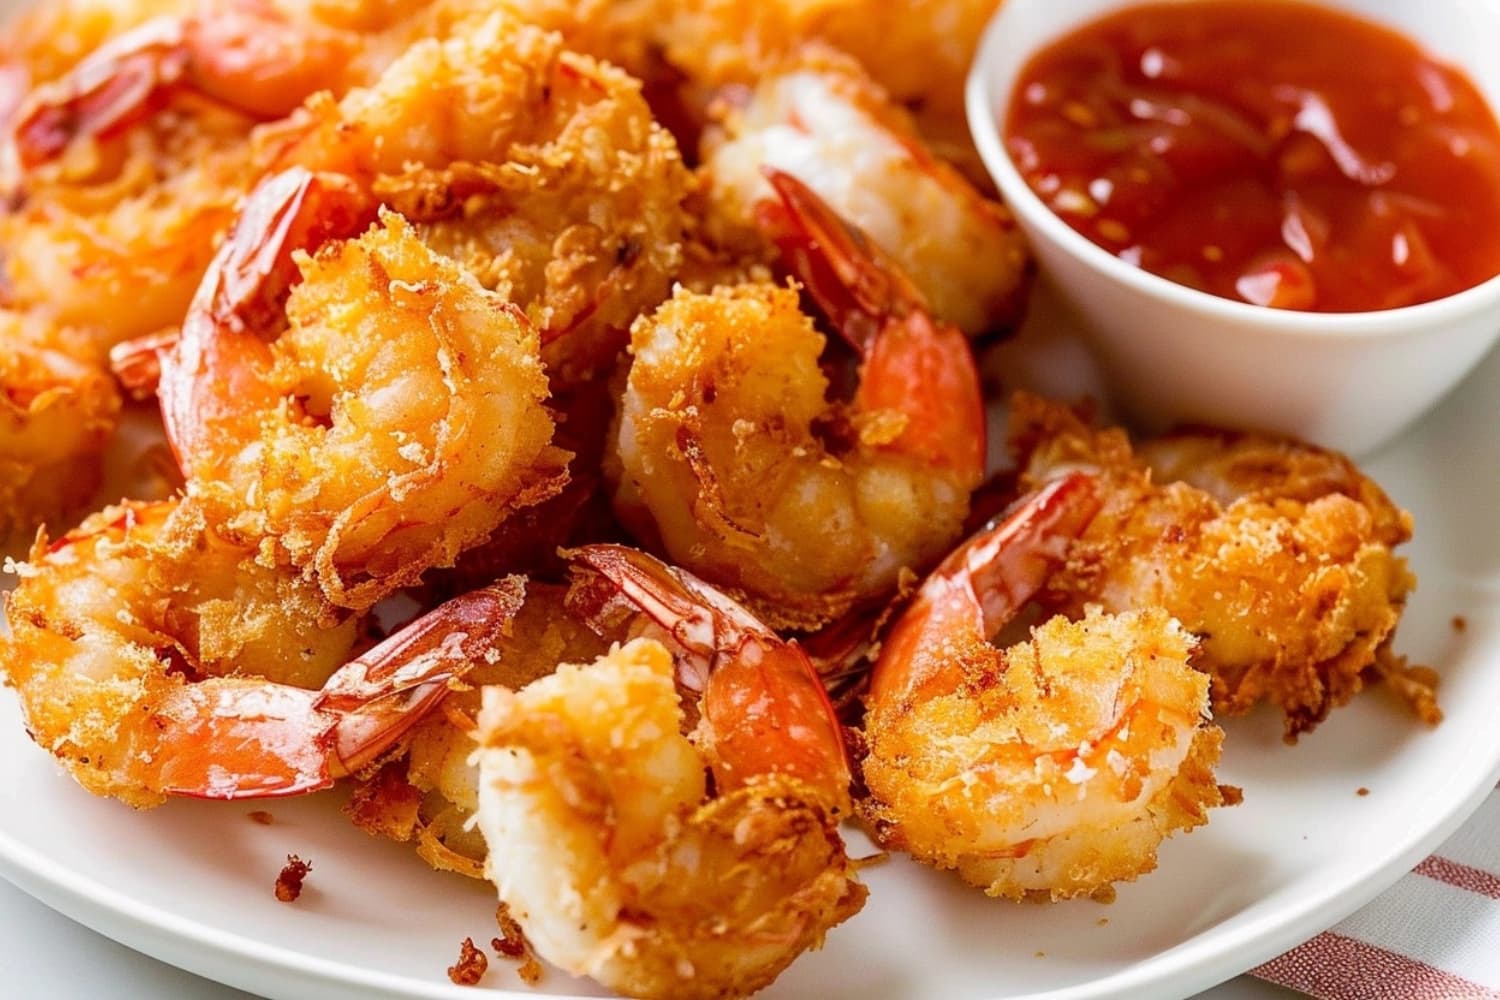 Coconut shrimp in a white plate served with sweet and sour sauce.